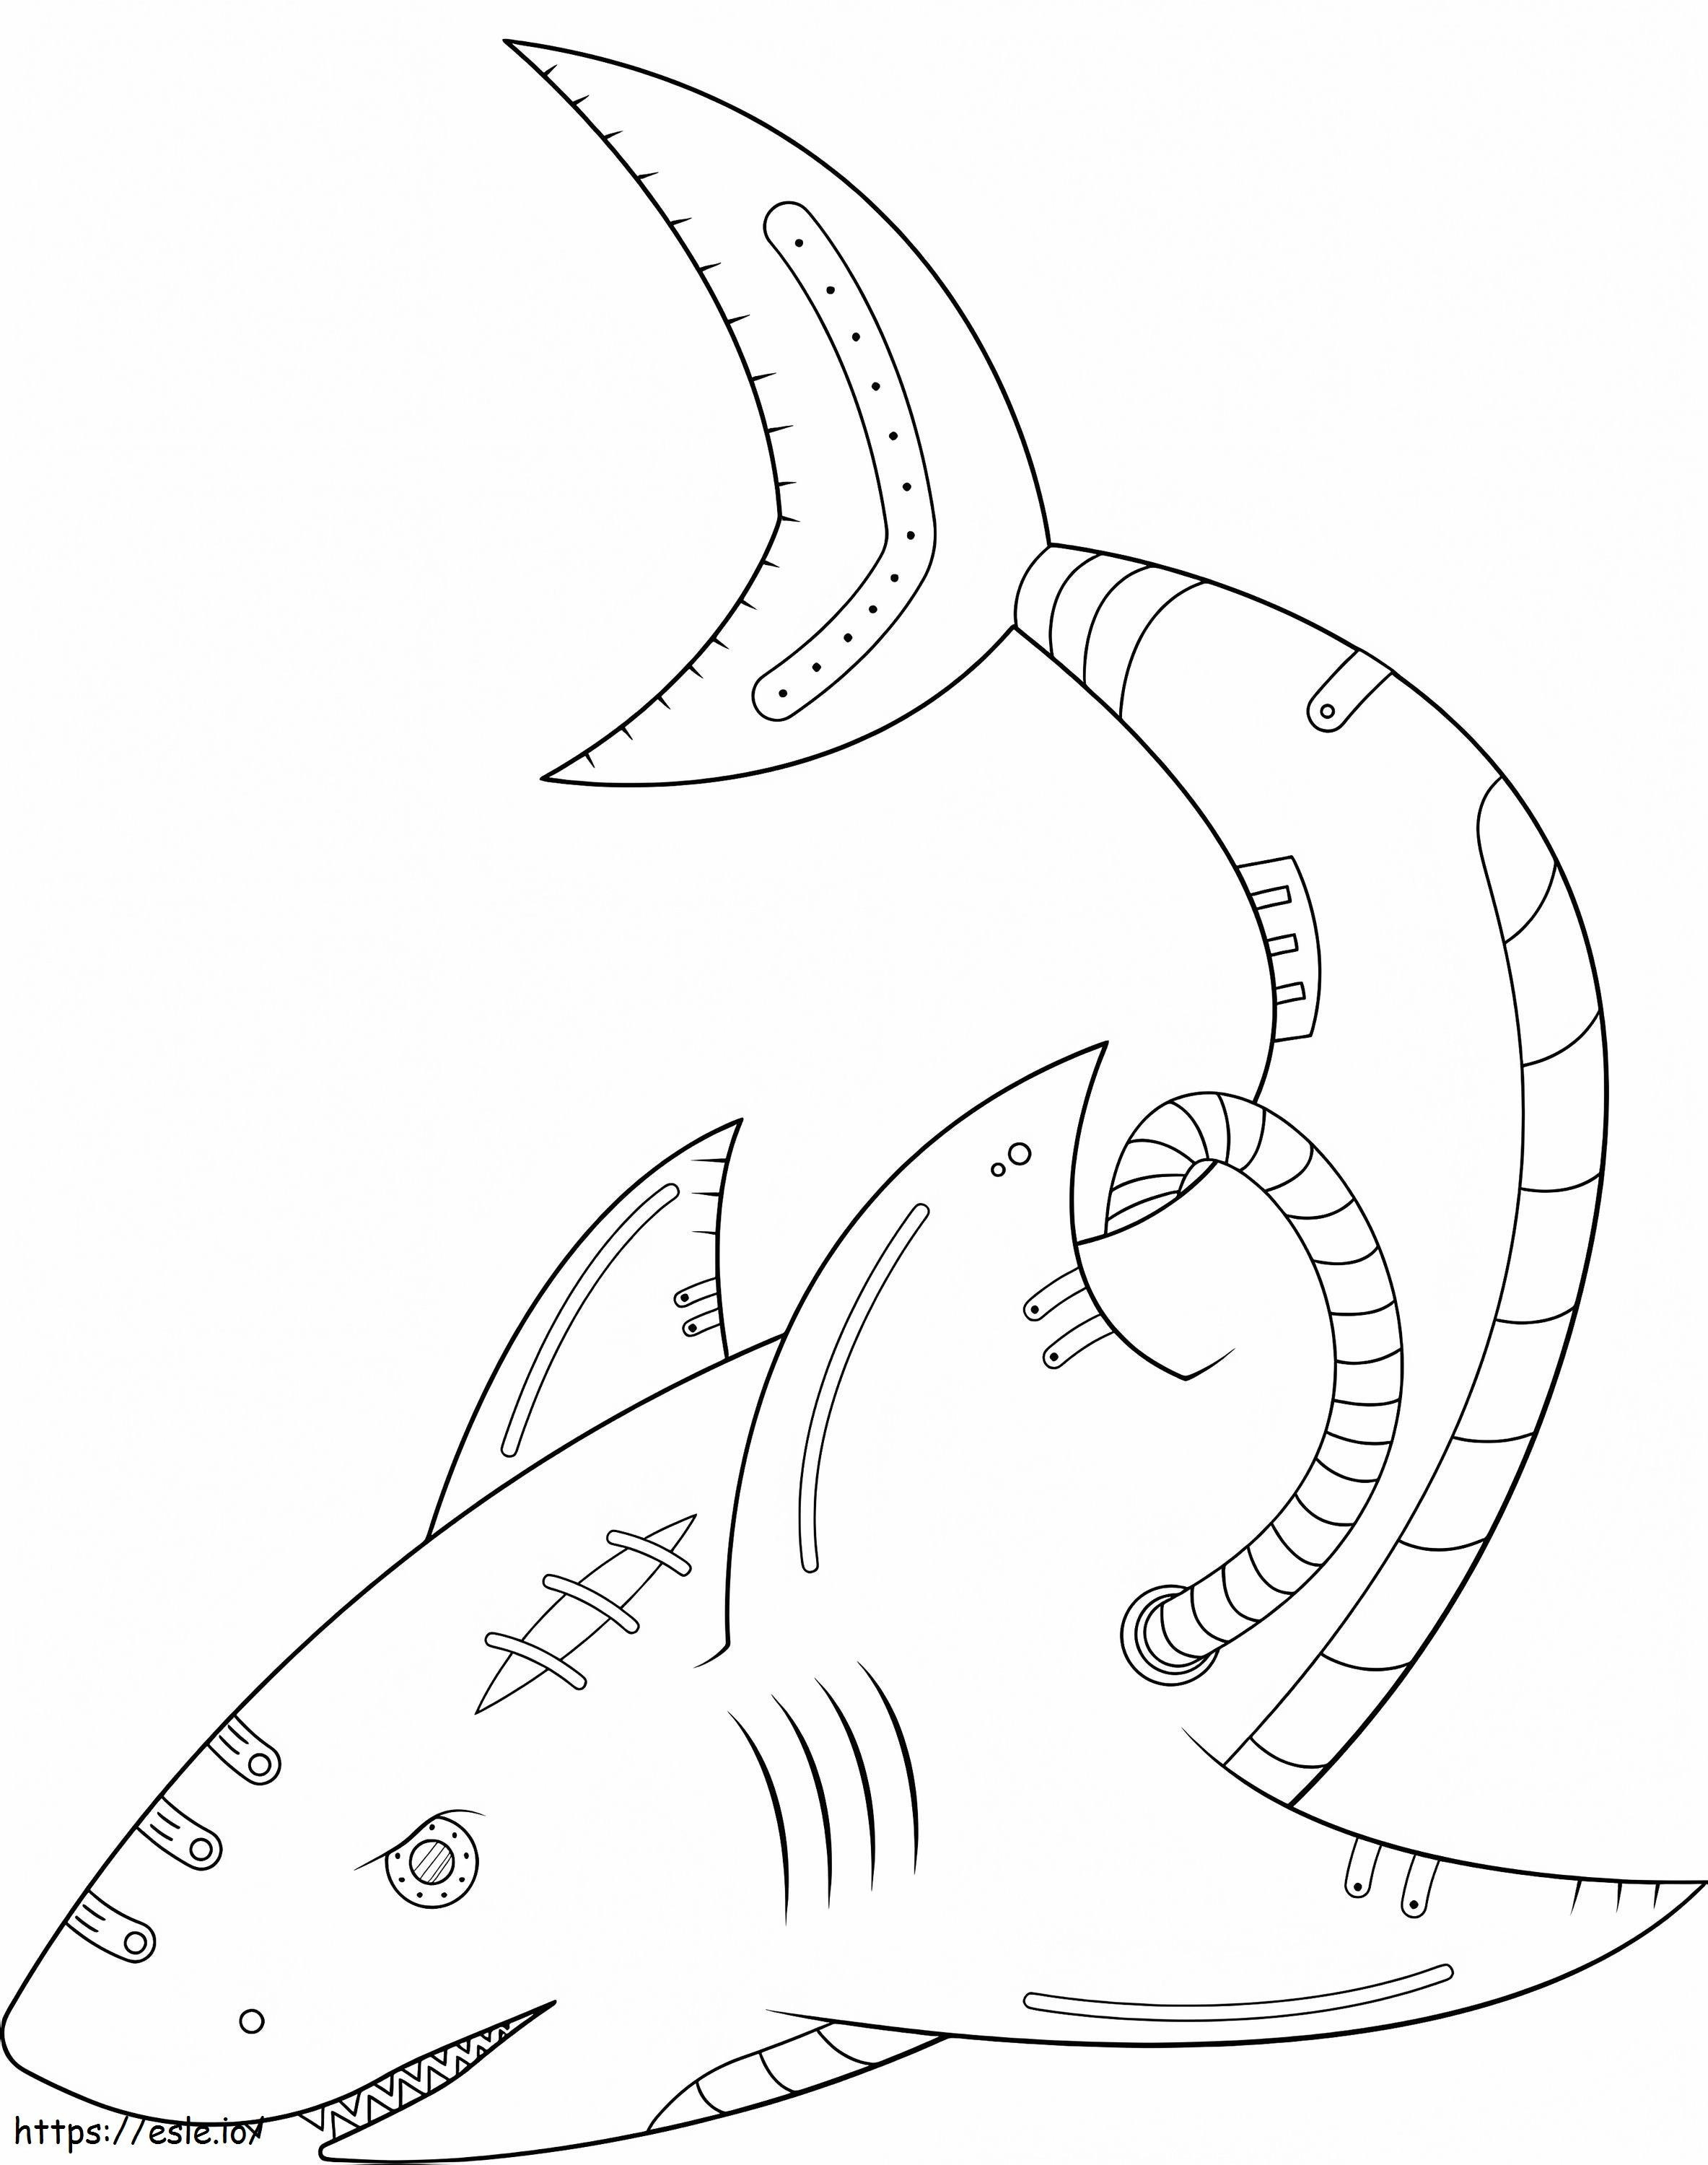 1597969012 Steampunk Shark coloring page